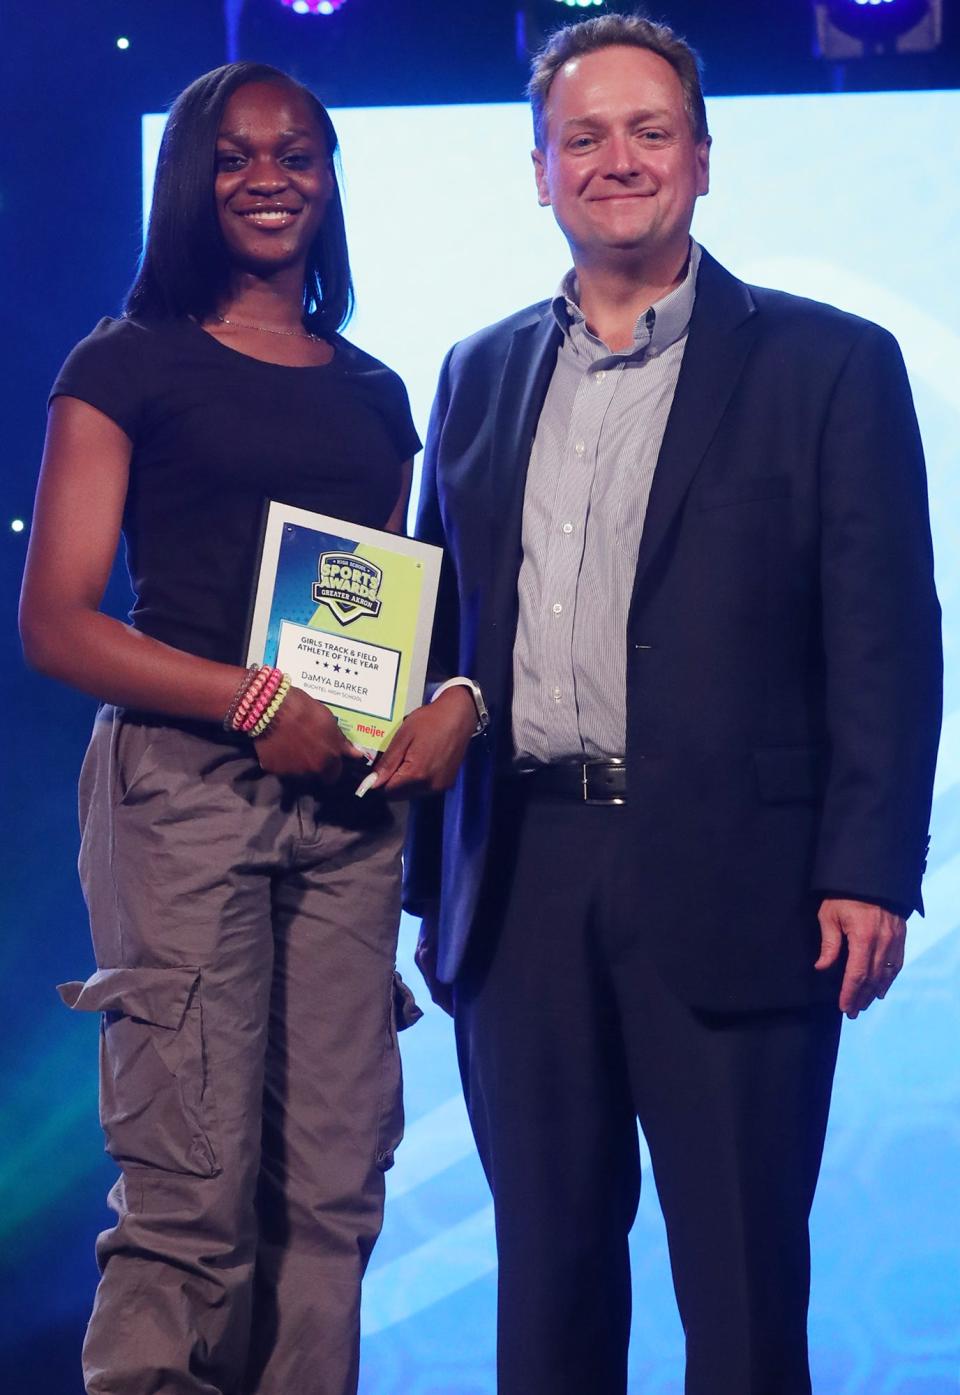 Buchtel High's DaMya Barker Greater Akron Girls Track and Field Player of the Year with Michael Shearer Akron Beacon Journal editor at the High School Sports All-Star Awards at the Civic Theatre in Akron on Friday.